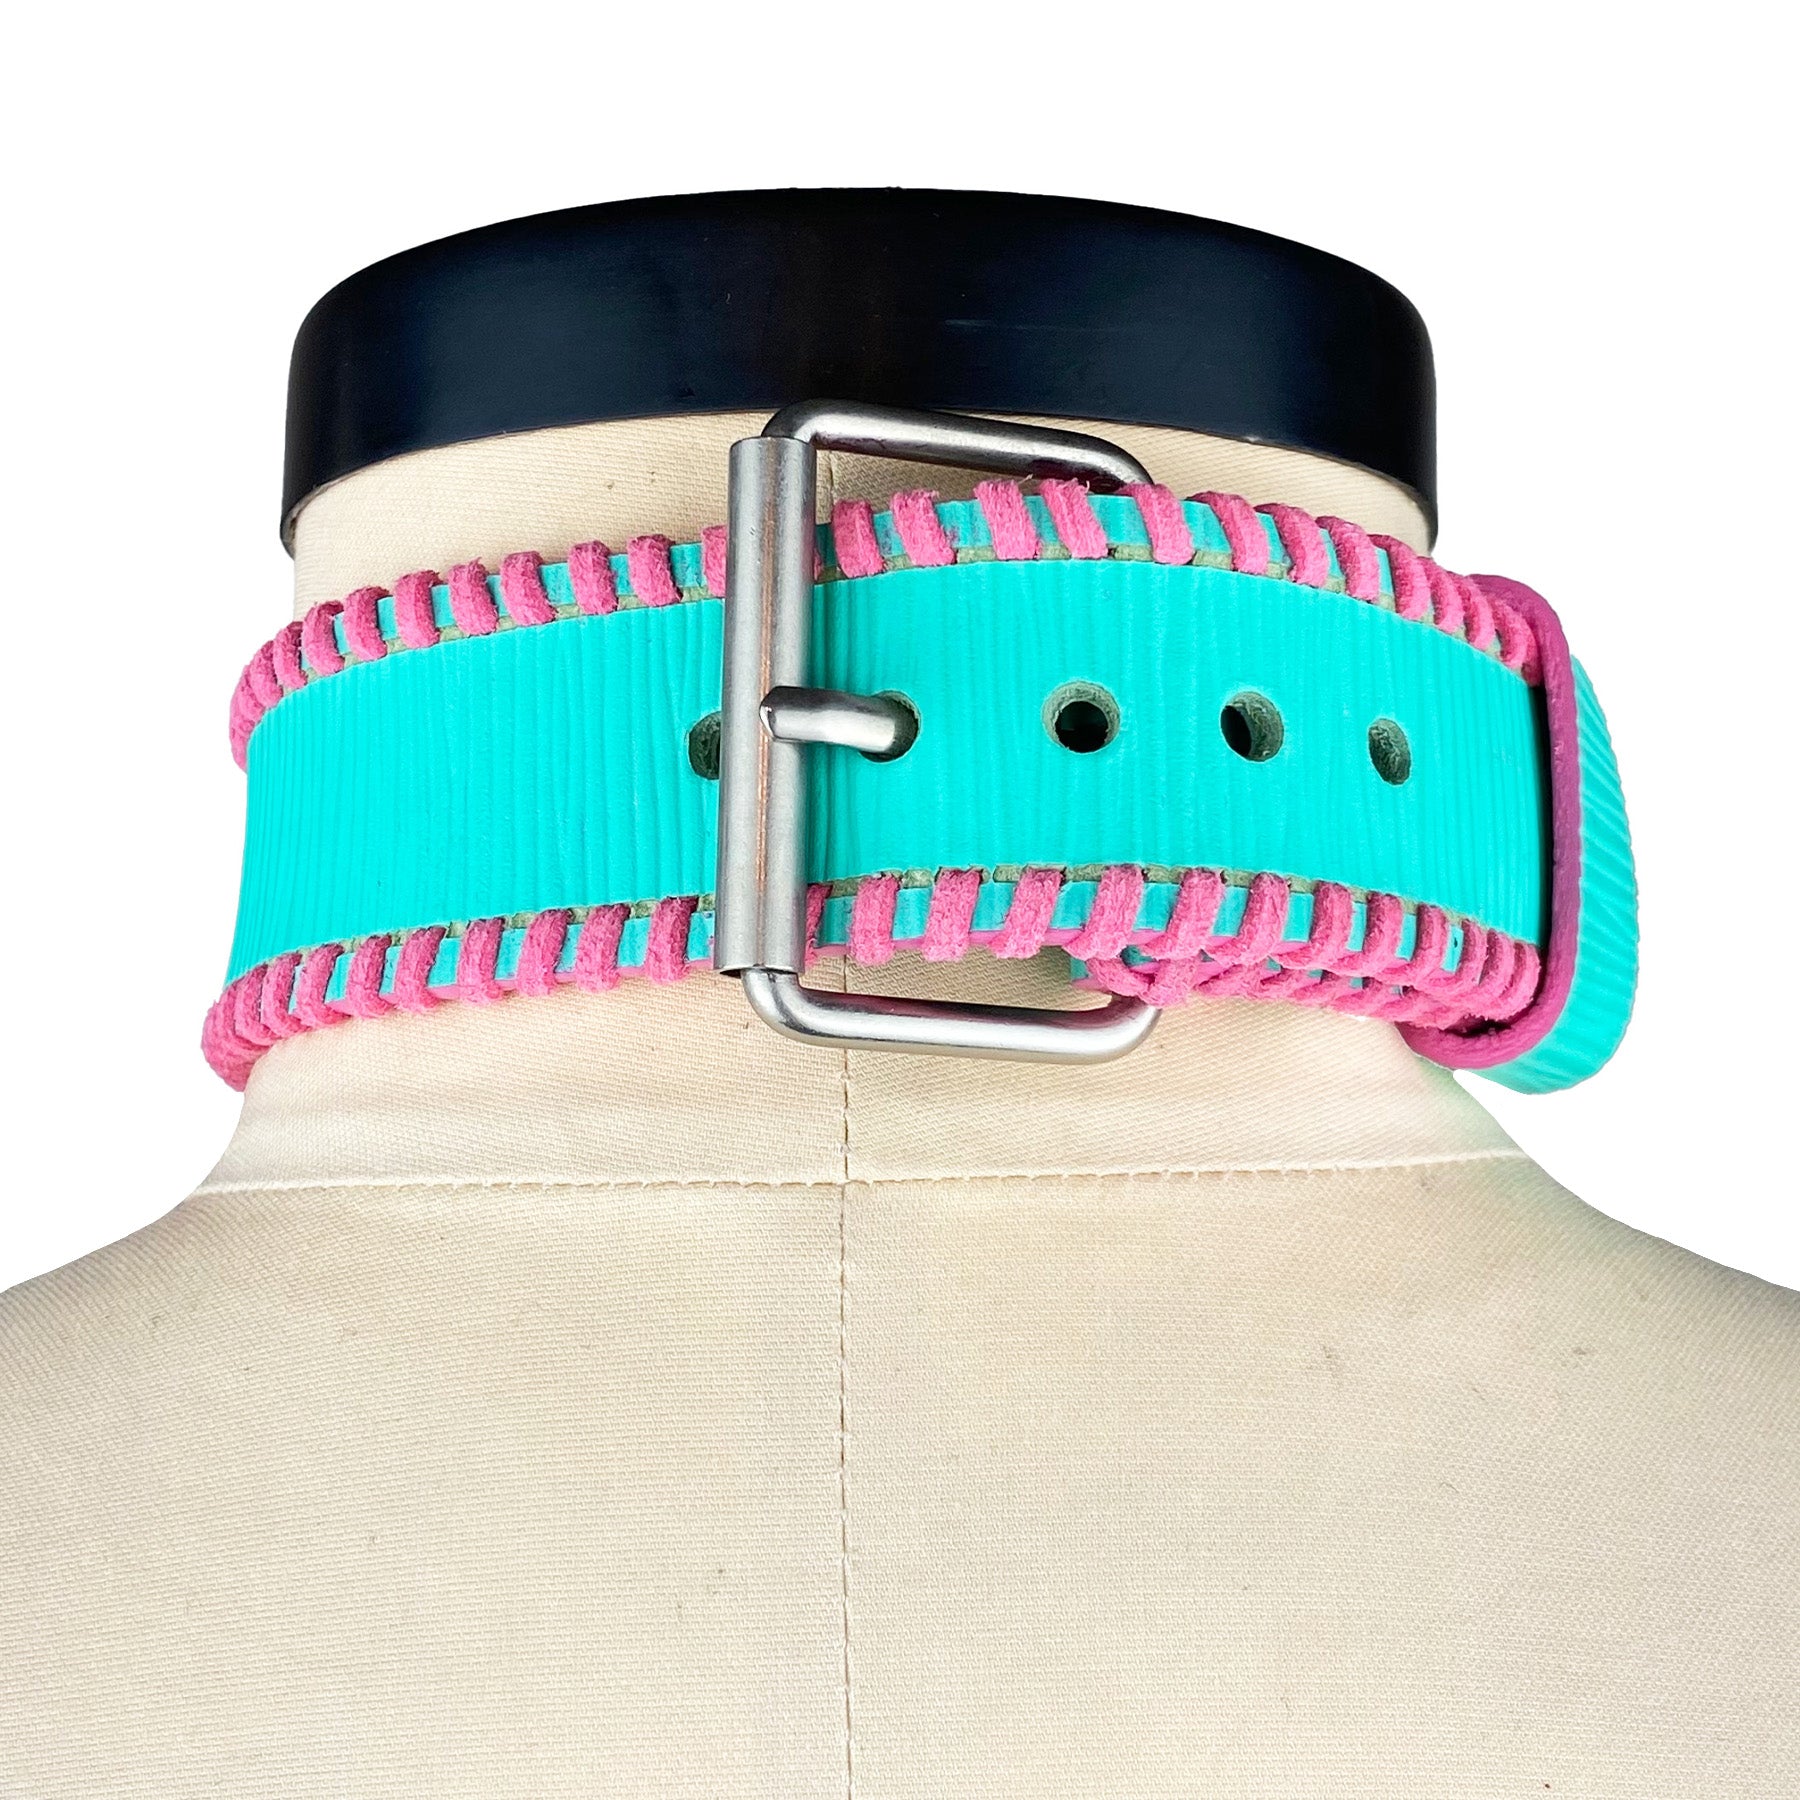 missy jenny mint textured leather with pink suede hand stitched trim back view choker leather accessory costume burlesque